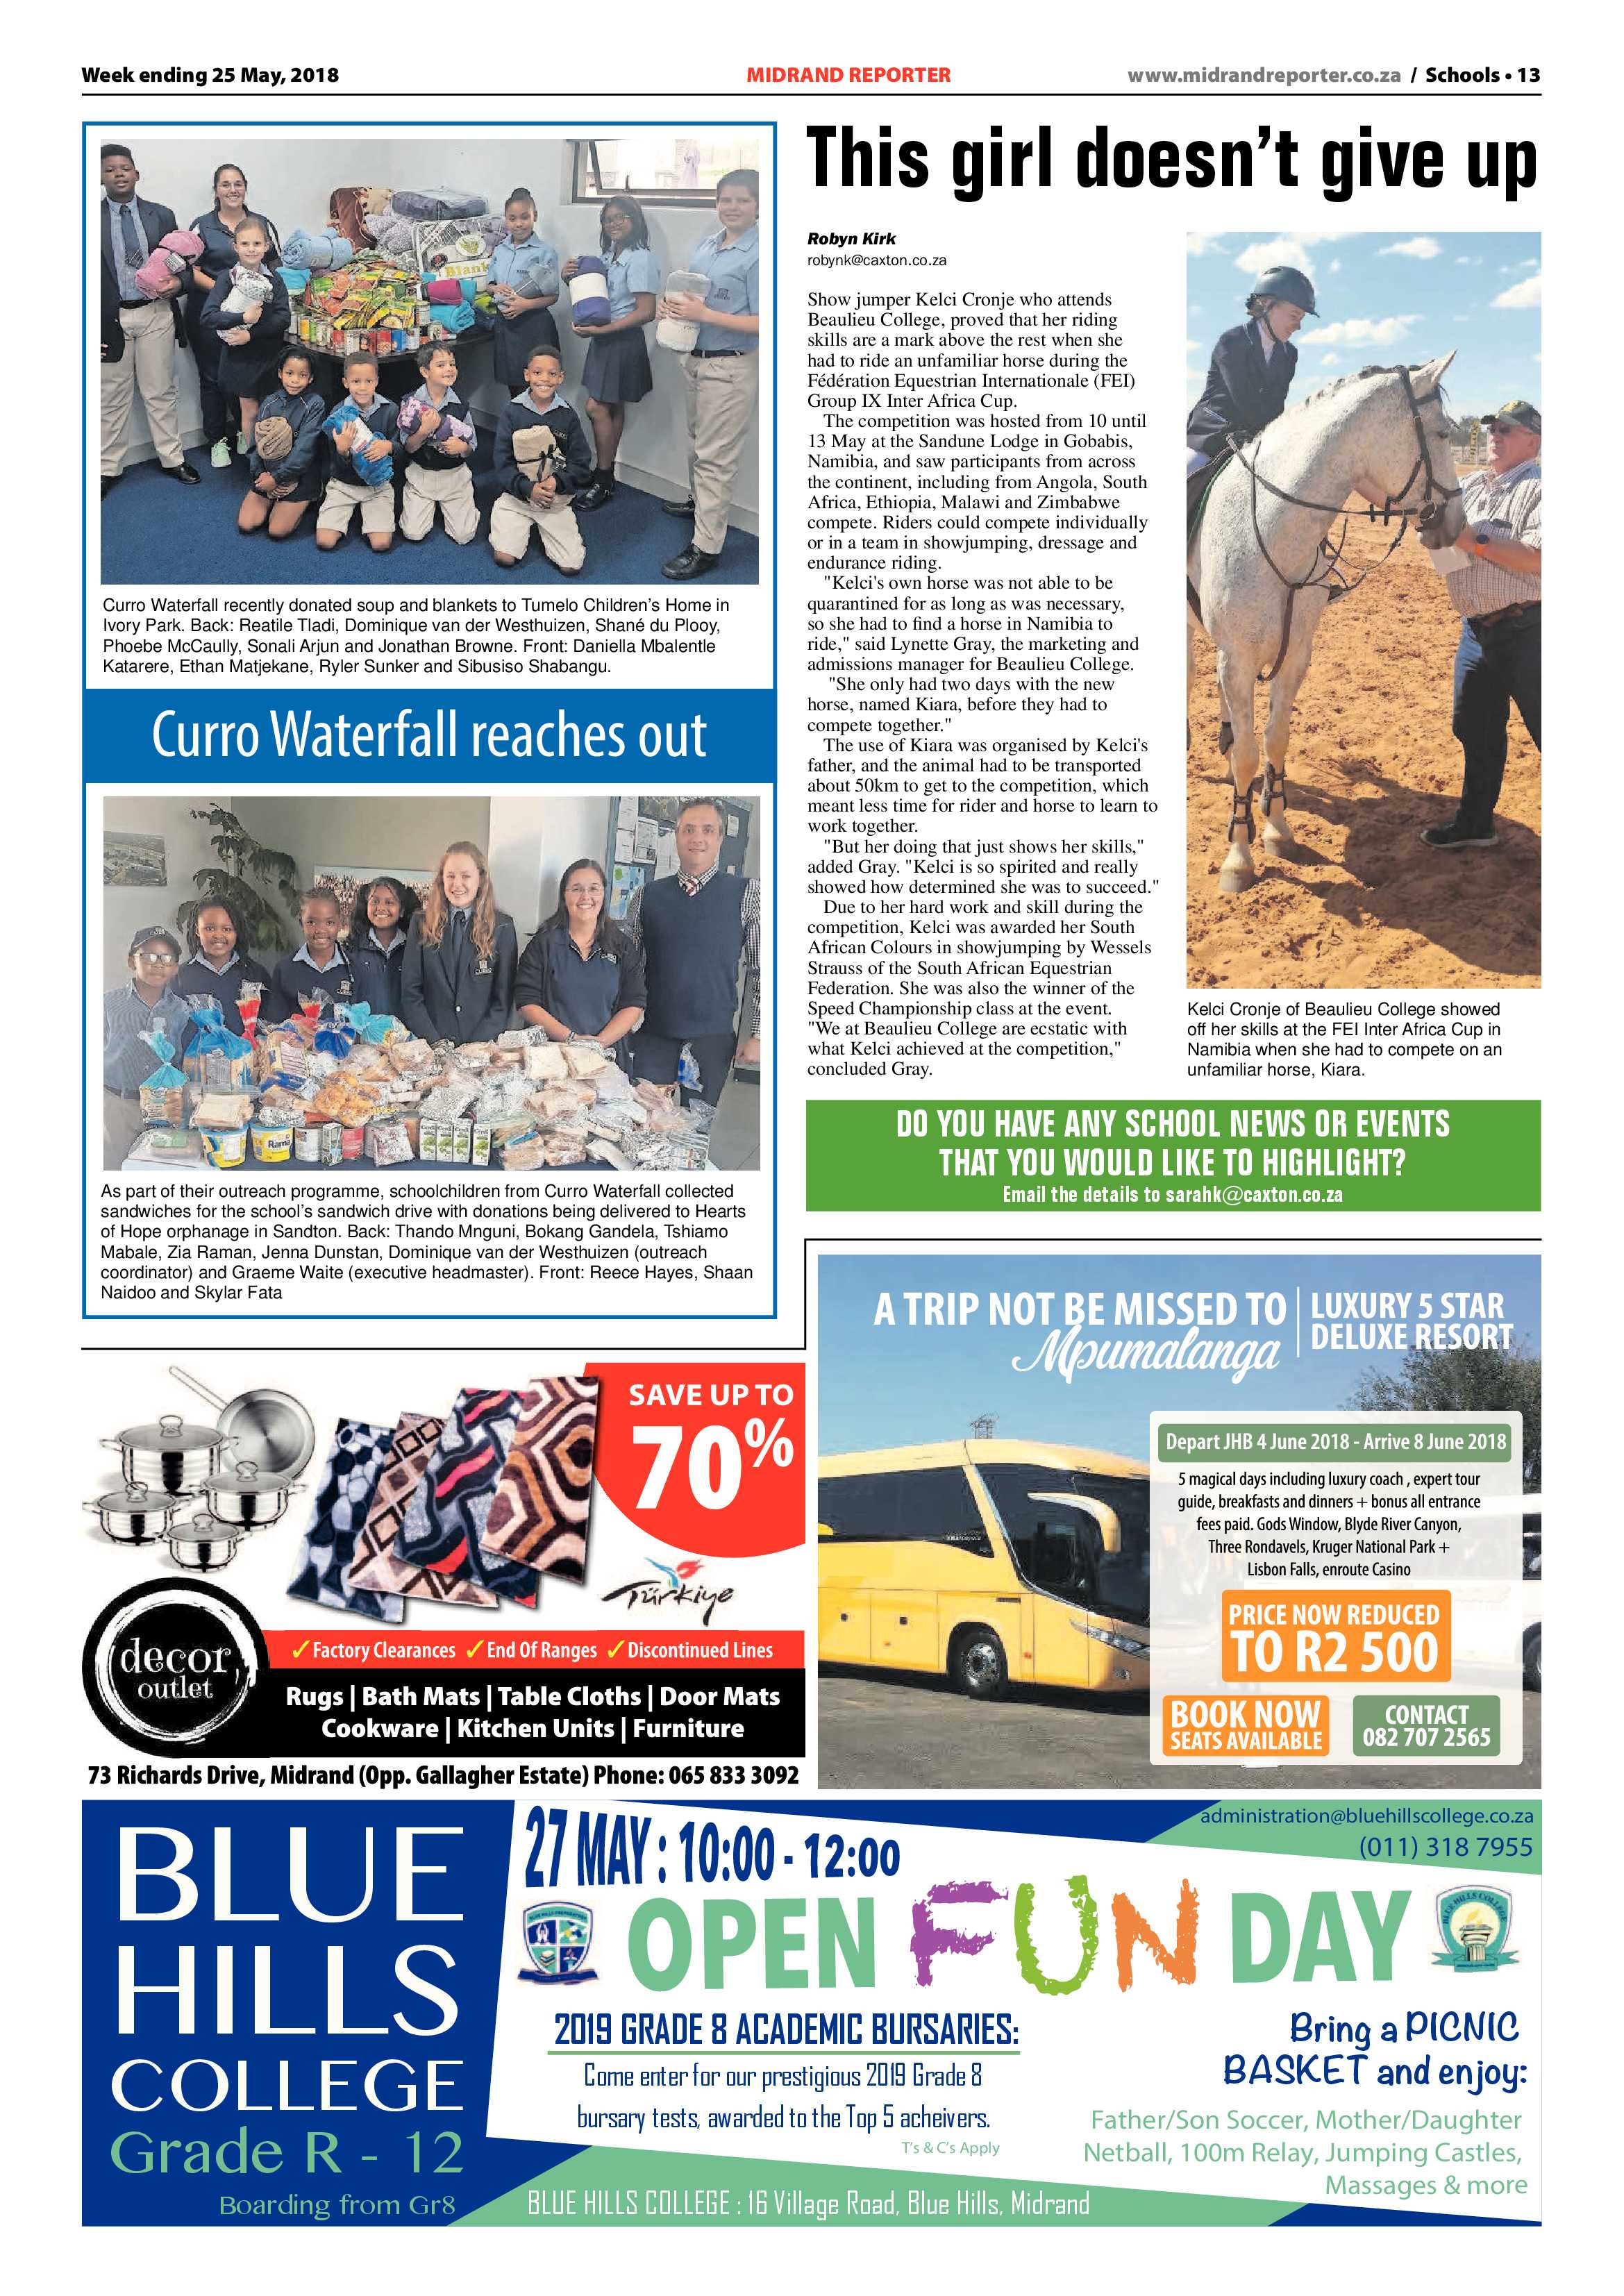 Midrand Reporter 25 May 2018 page 13